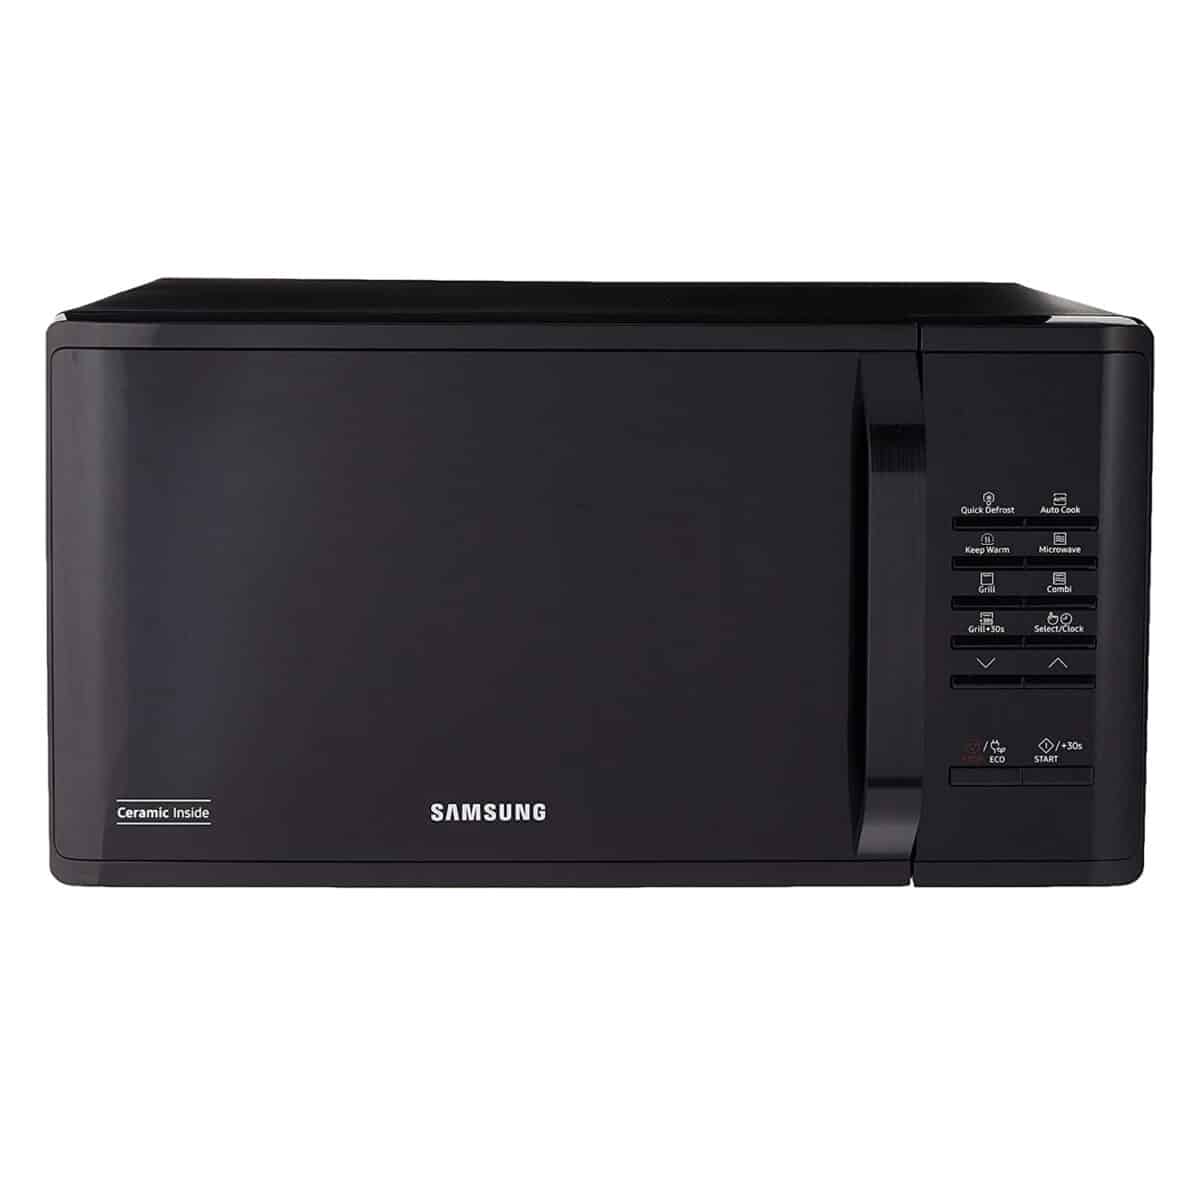 Samsung 30L Grill Microwave Oven MG30T5018CK/SM